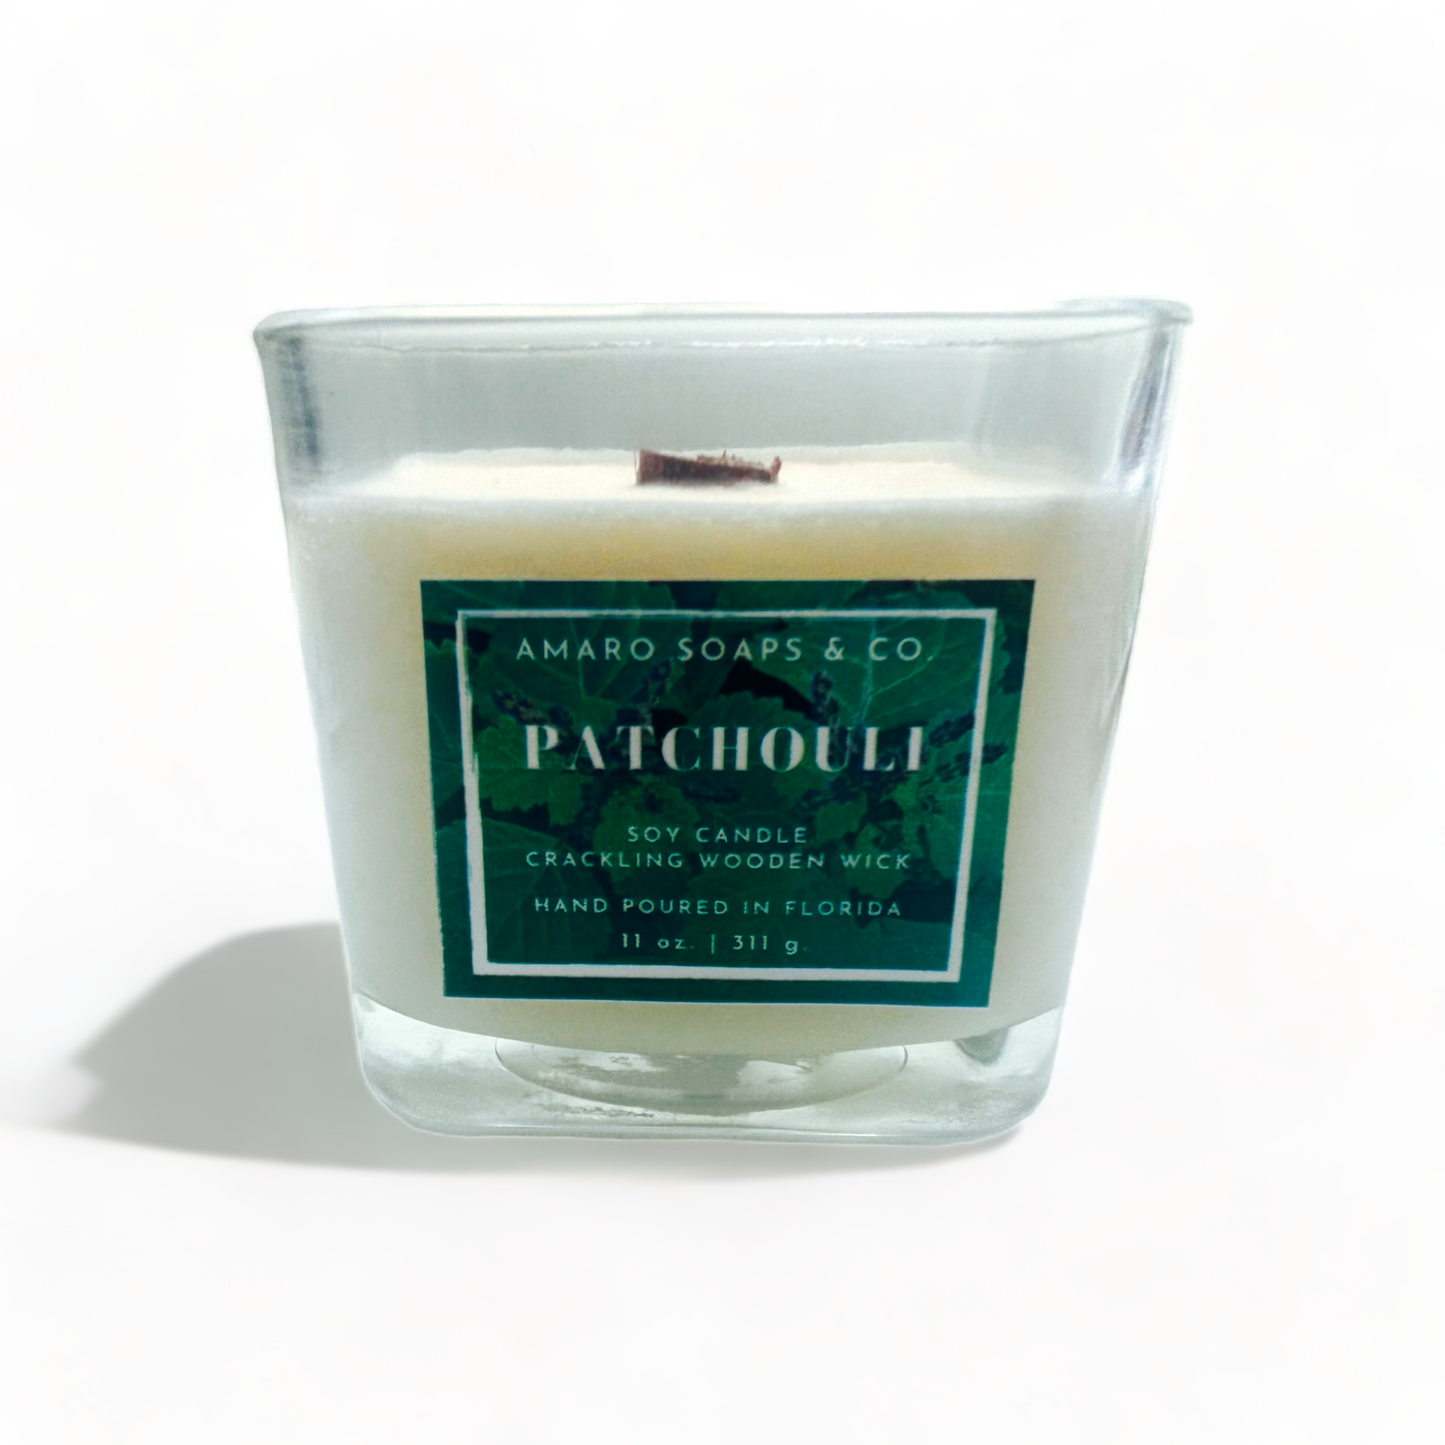 Patchouli Wooden Wick Soy Candle